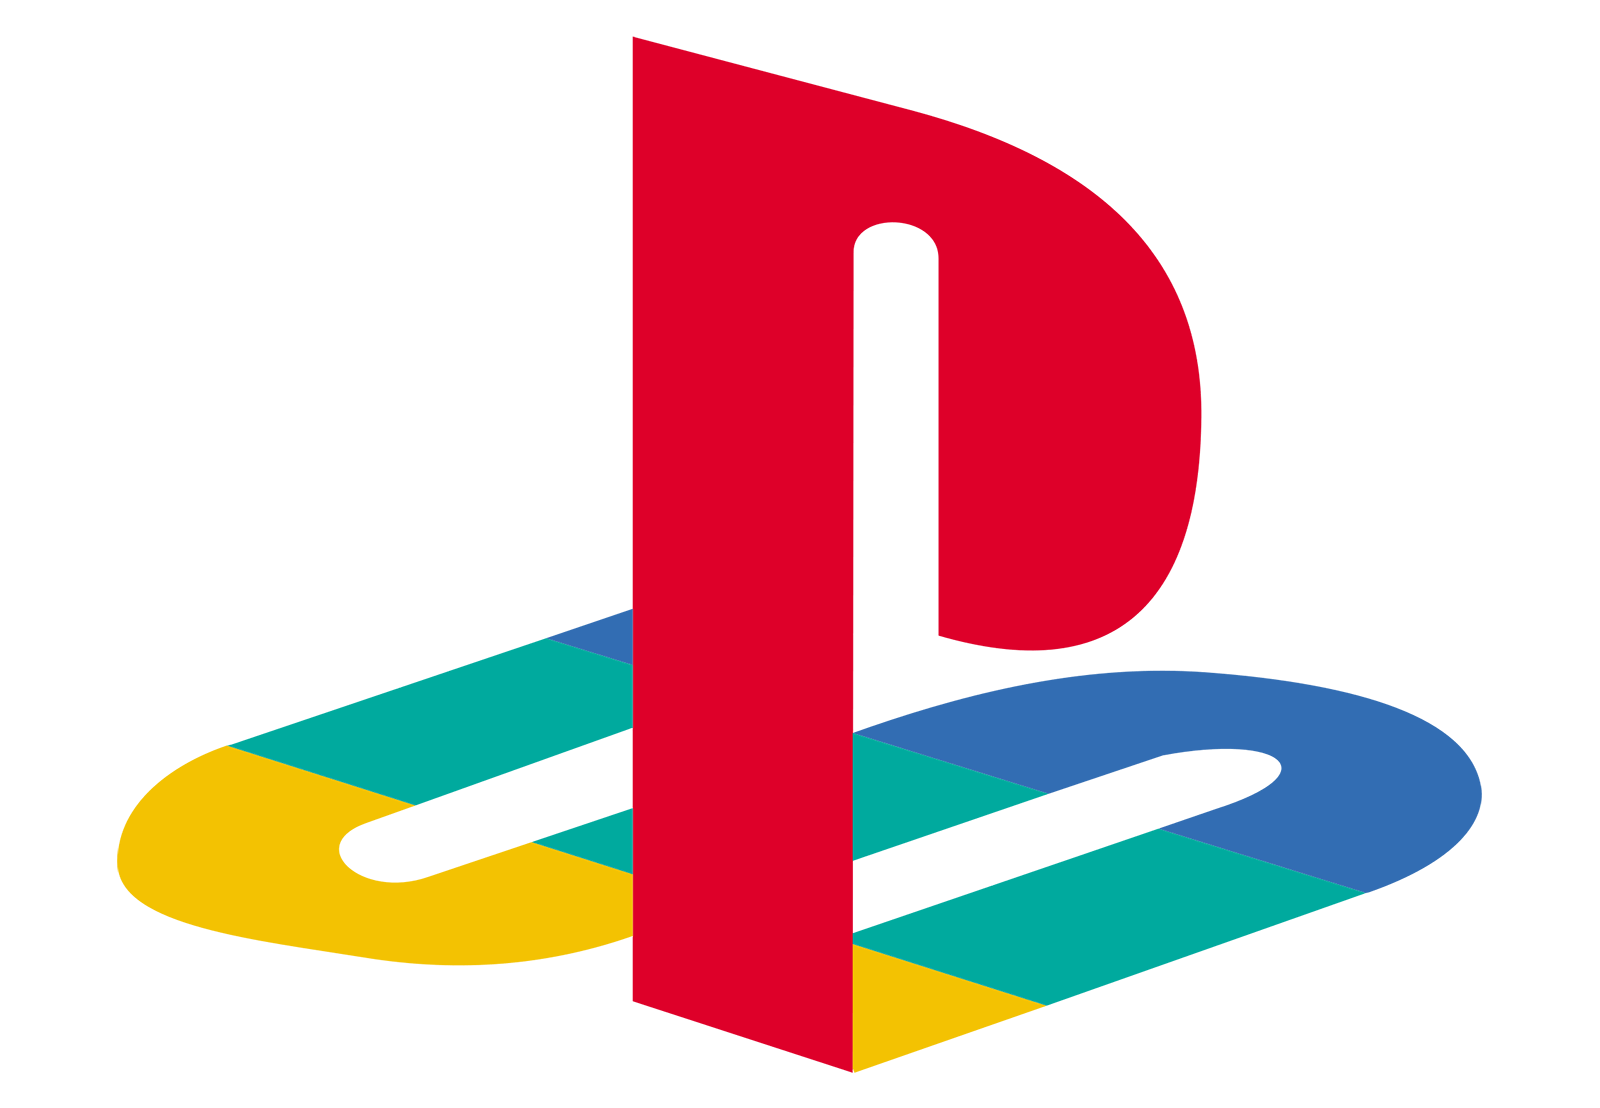 Playsation Logo - Meaning PlayStation logo and symbol | history and evolution